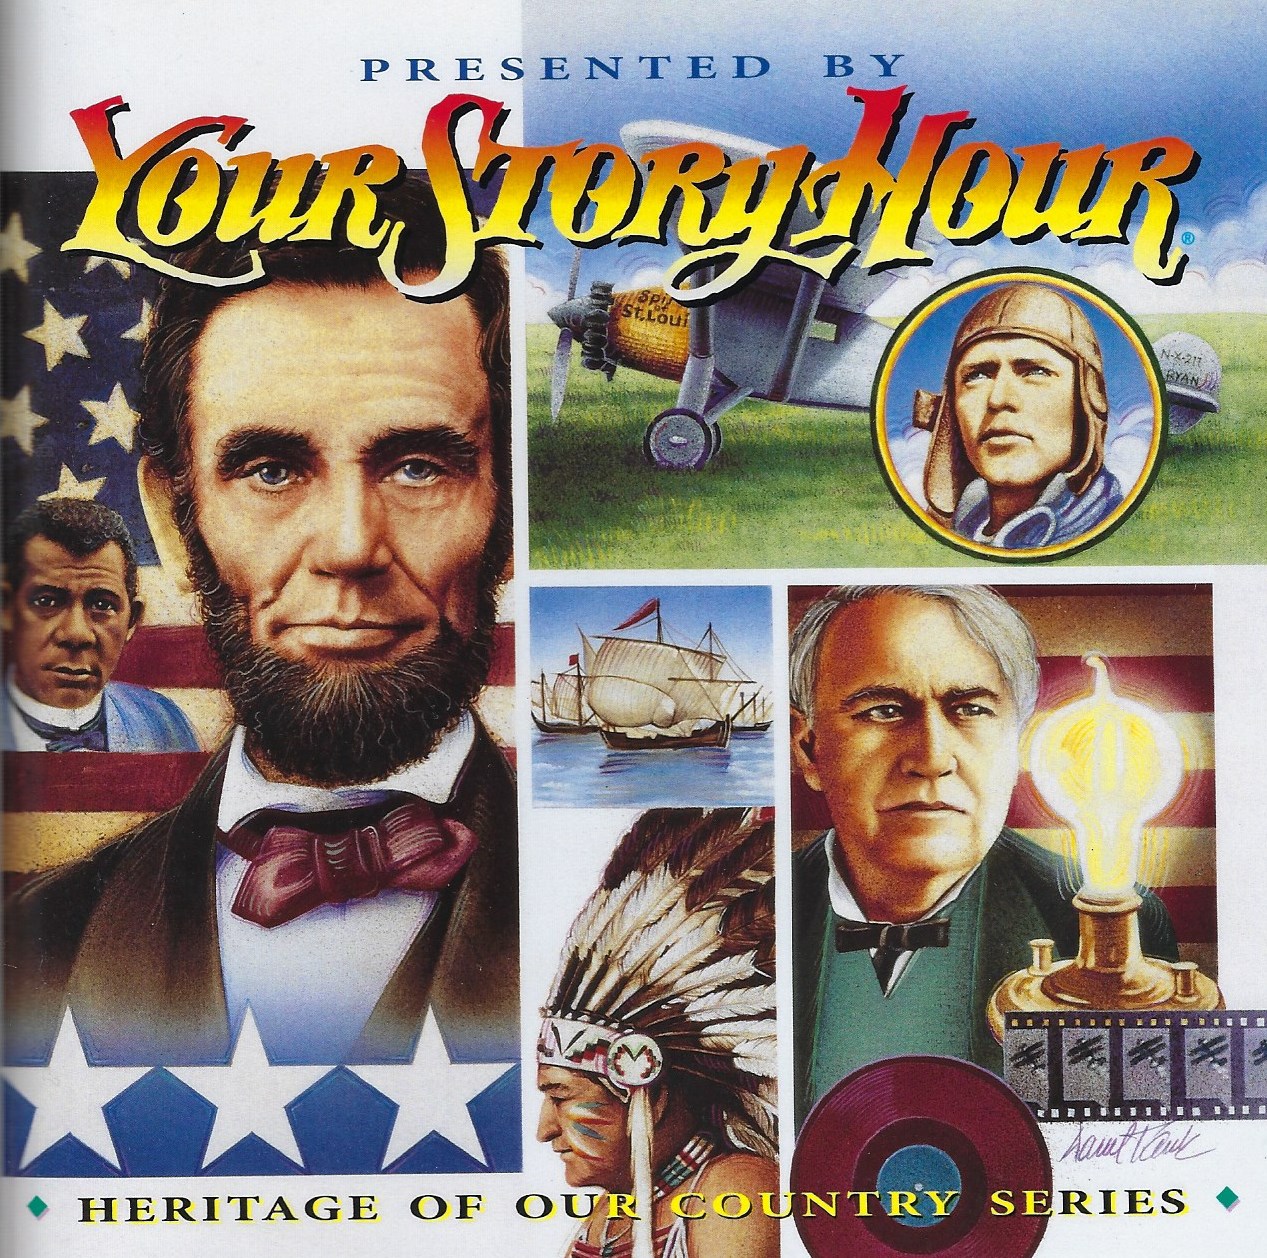 HERITAGE OF OUR COUNTRY CD ALBUM 6 Your Story Hour